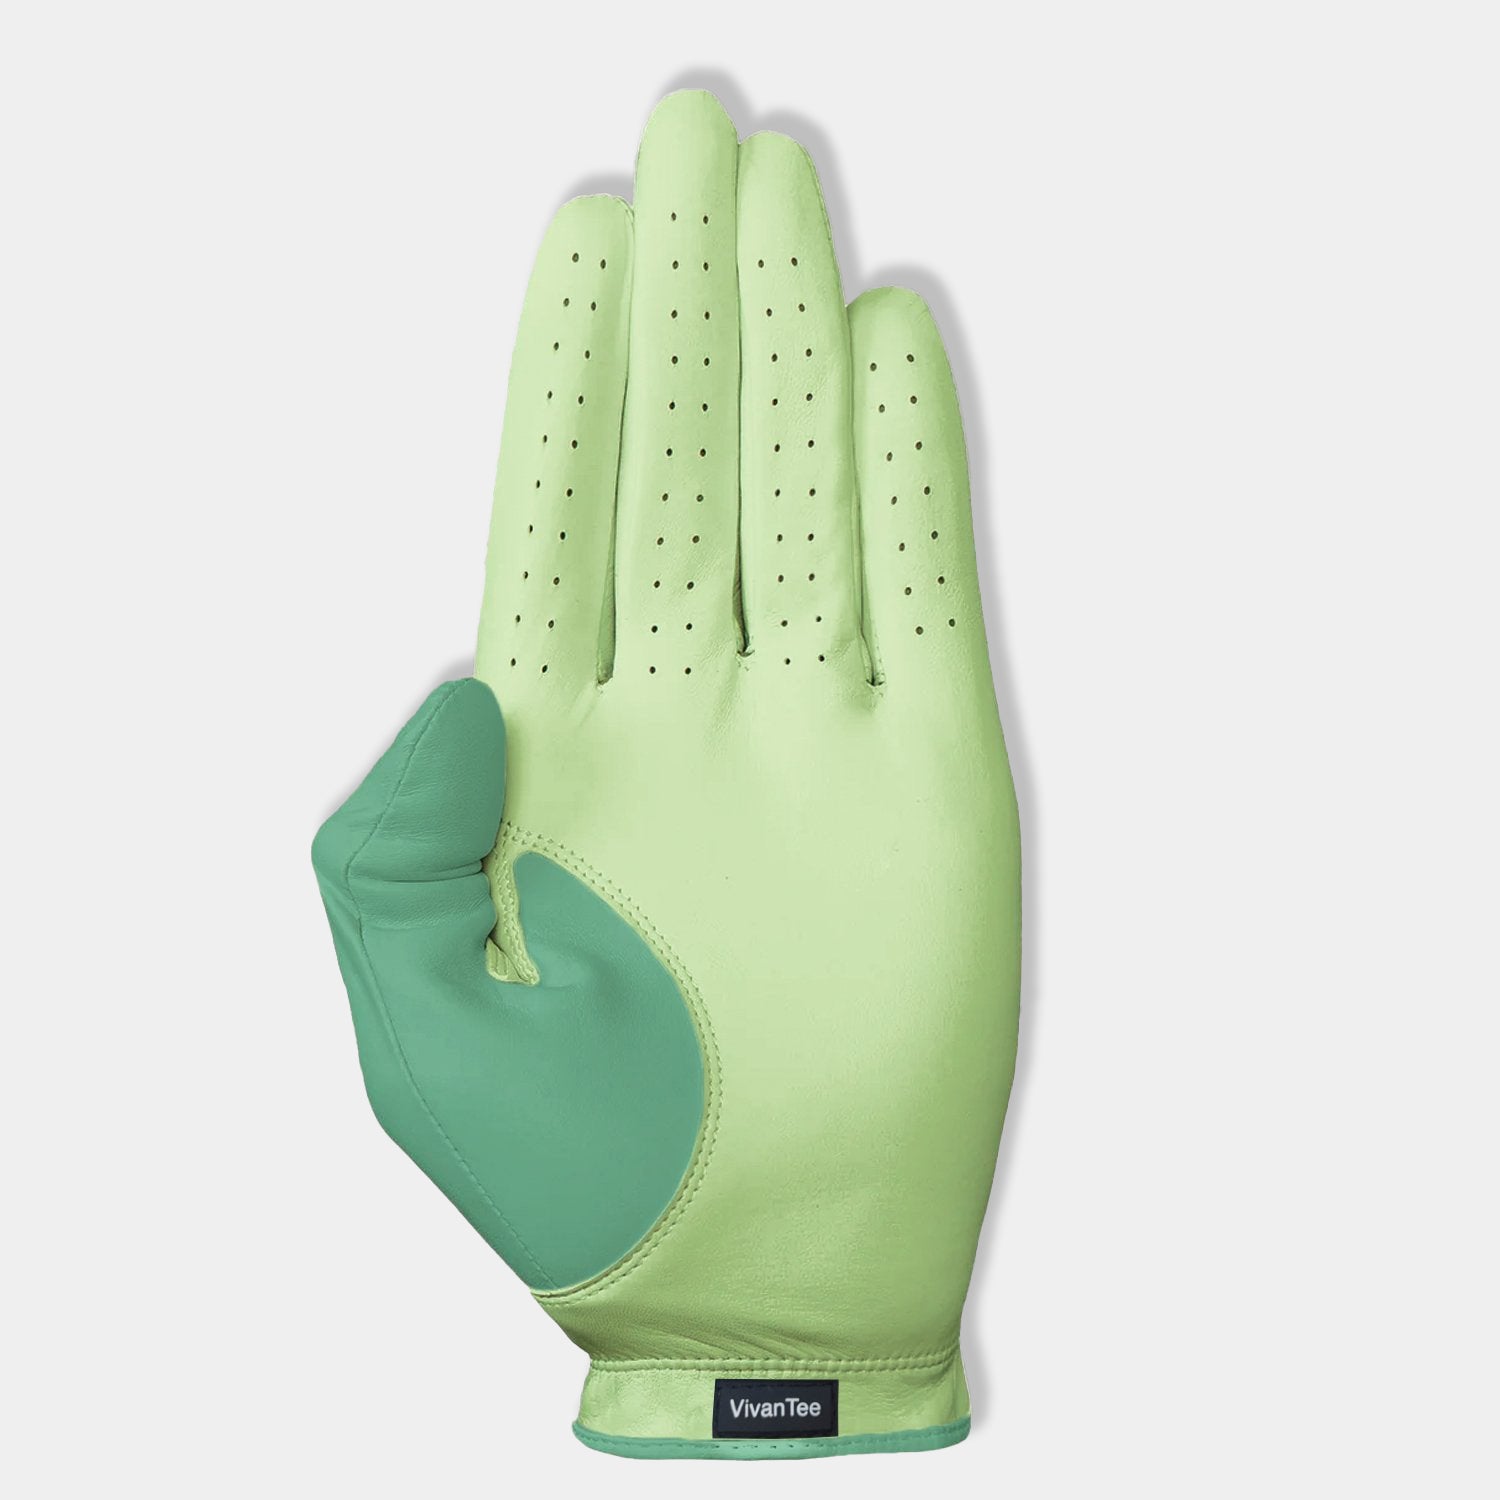 Green Golf Glove for men showing bottom with palm and VivanTee logo.